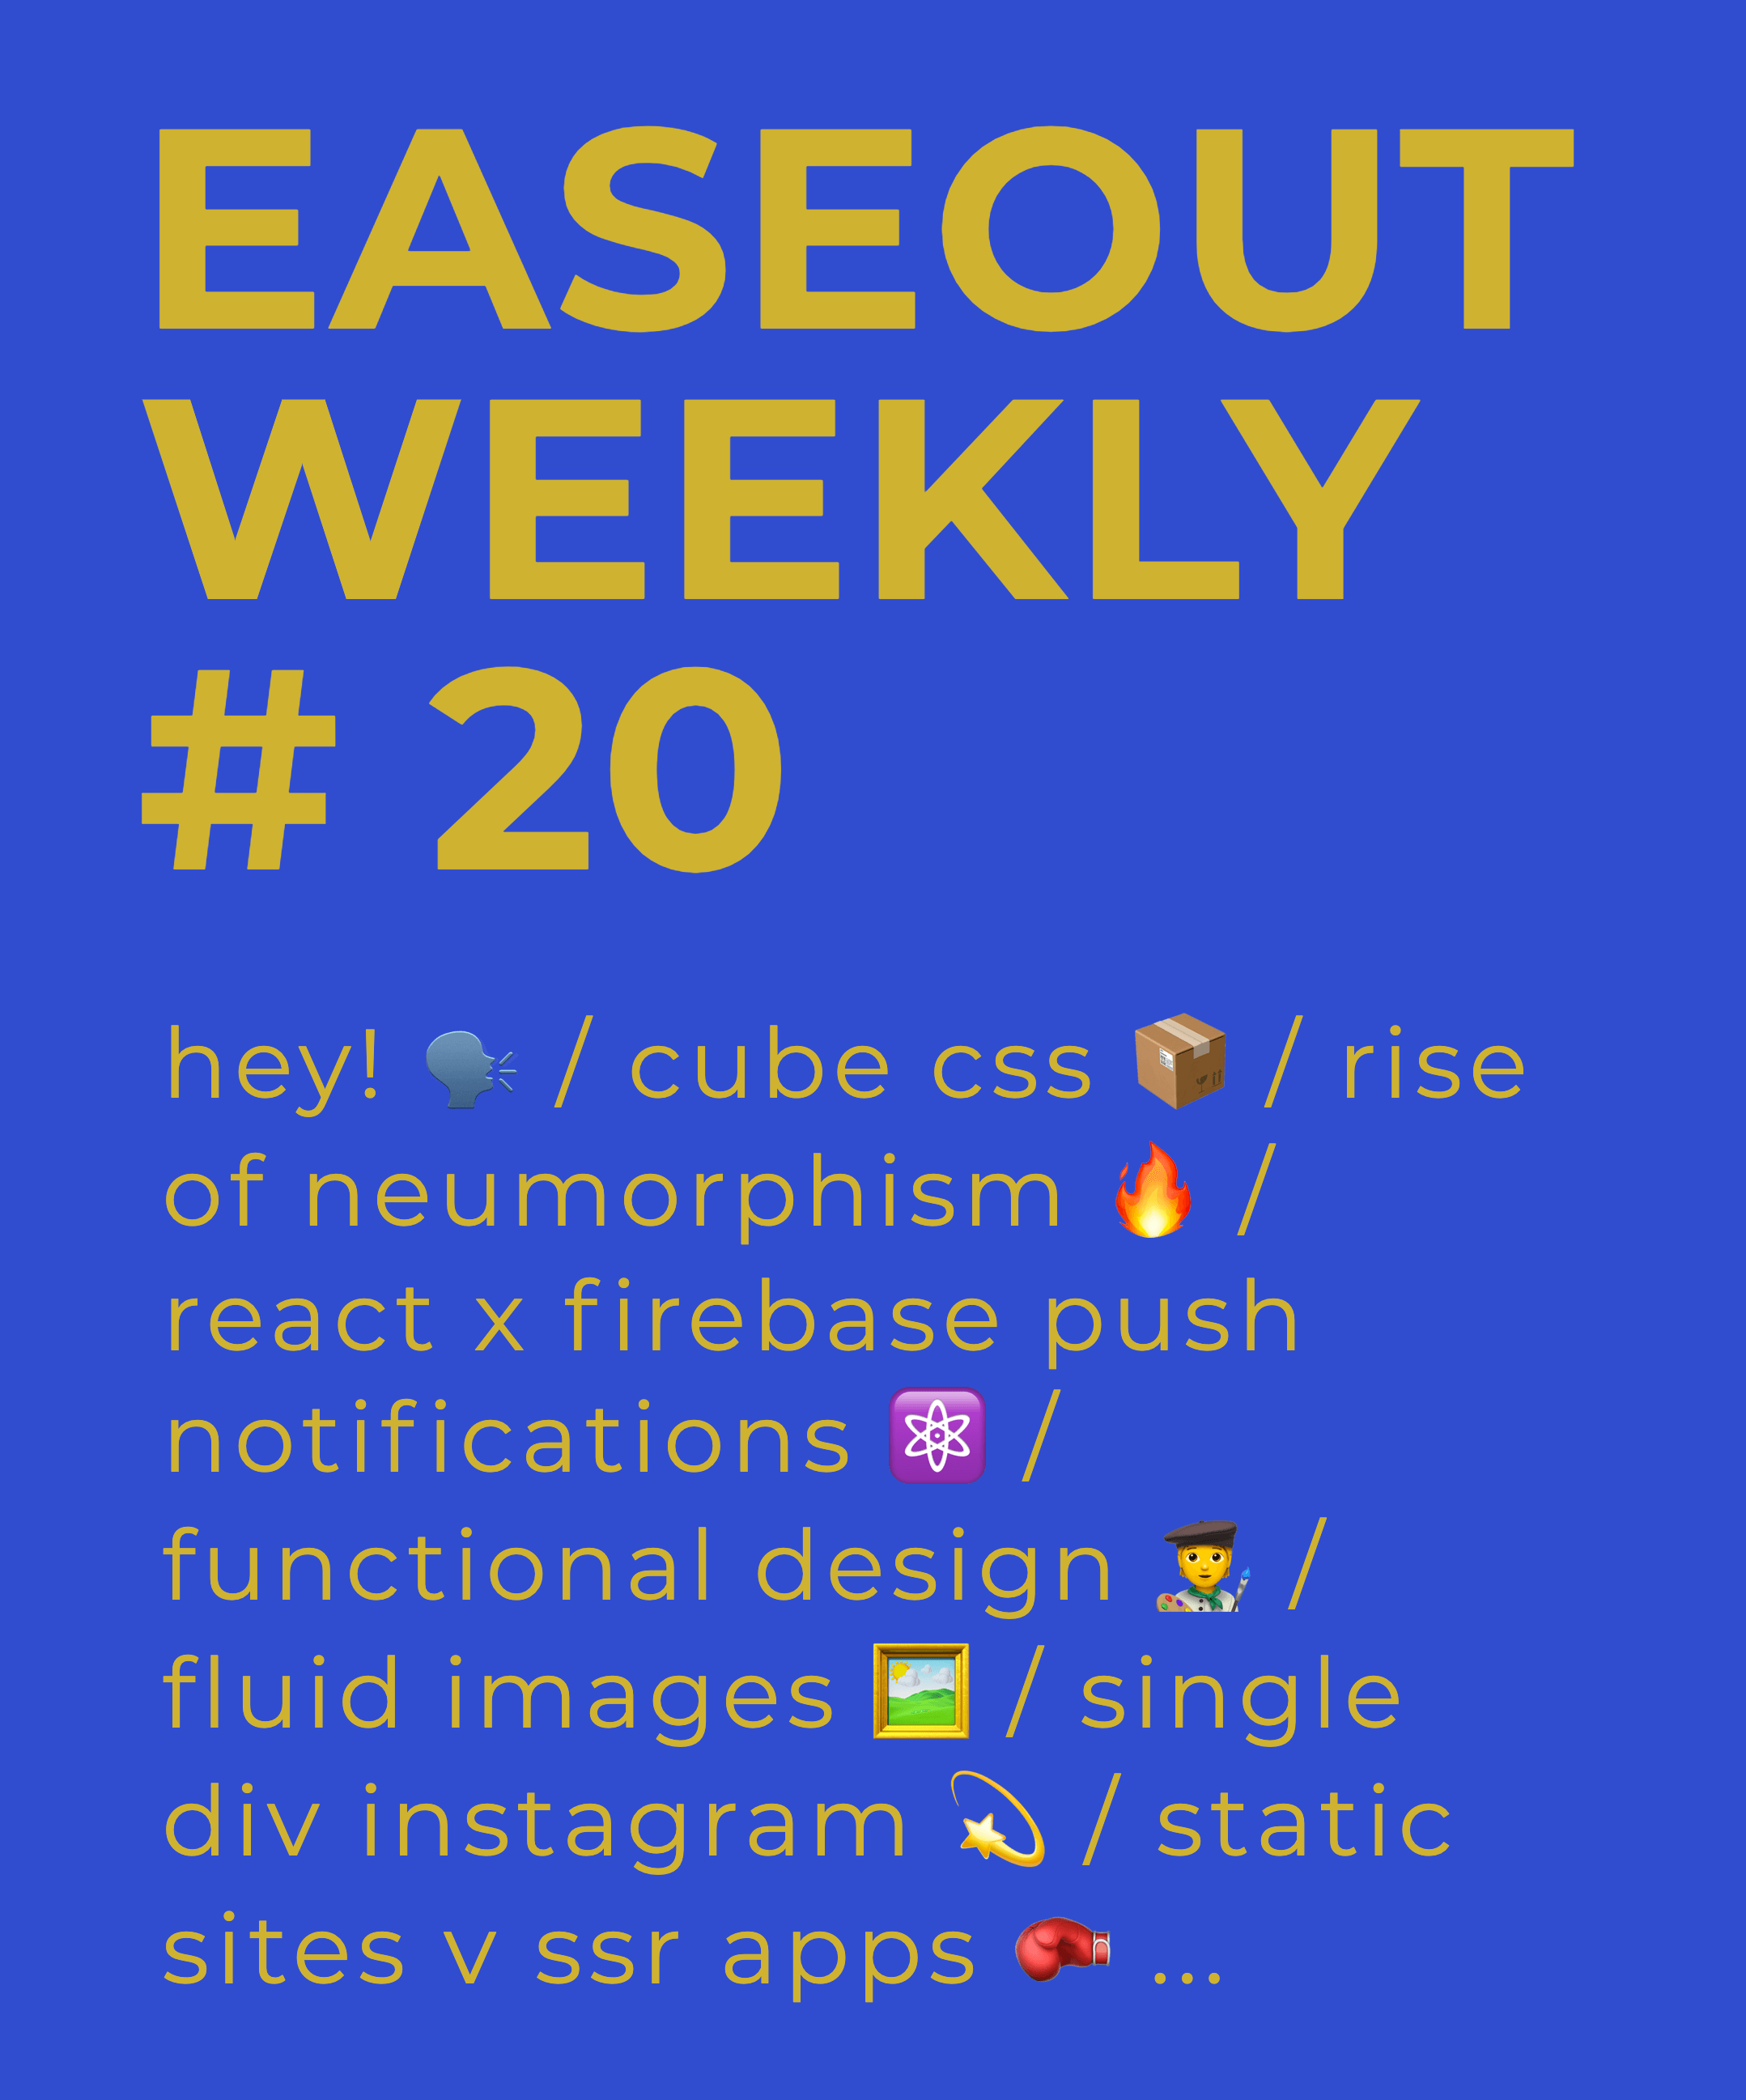 Easeout Weekly #20